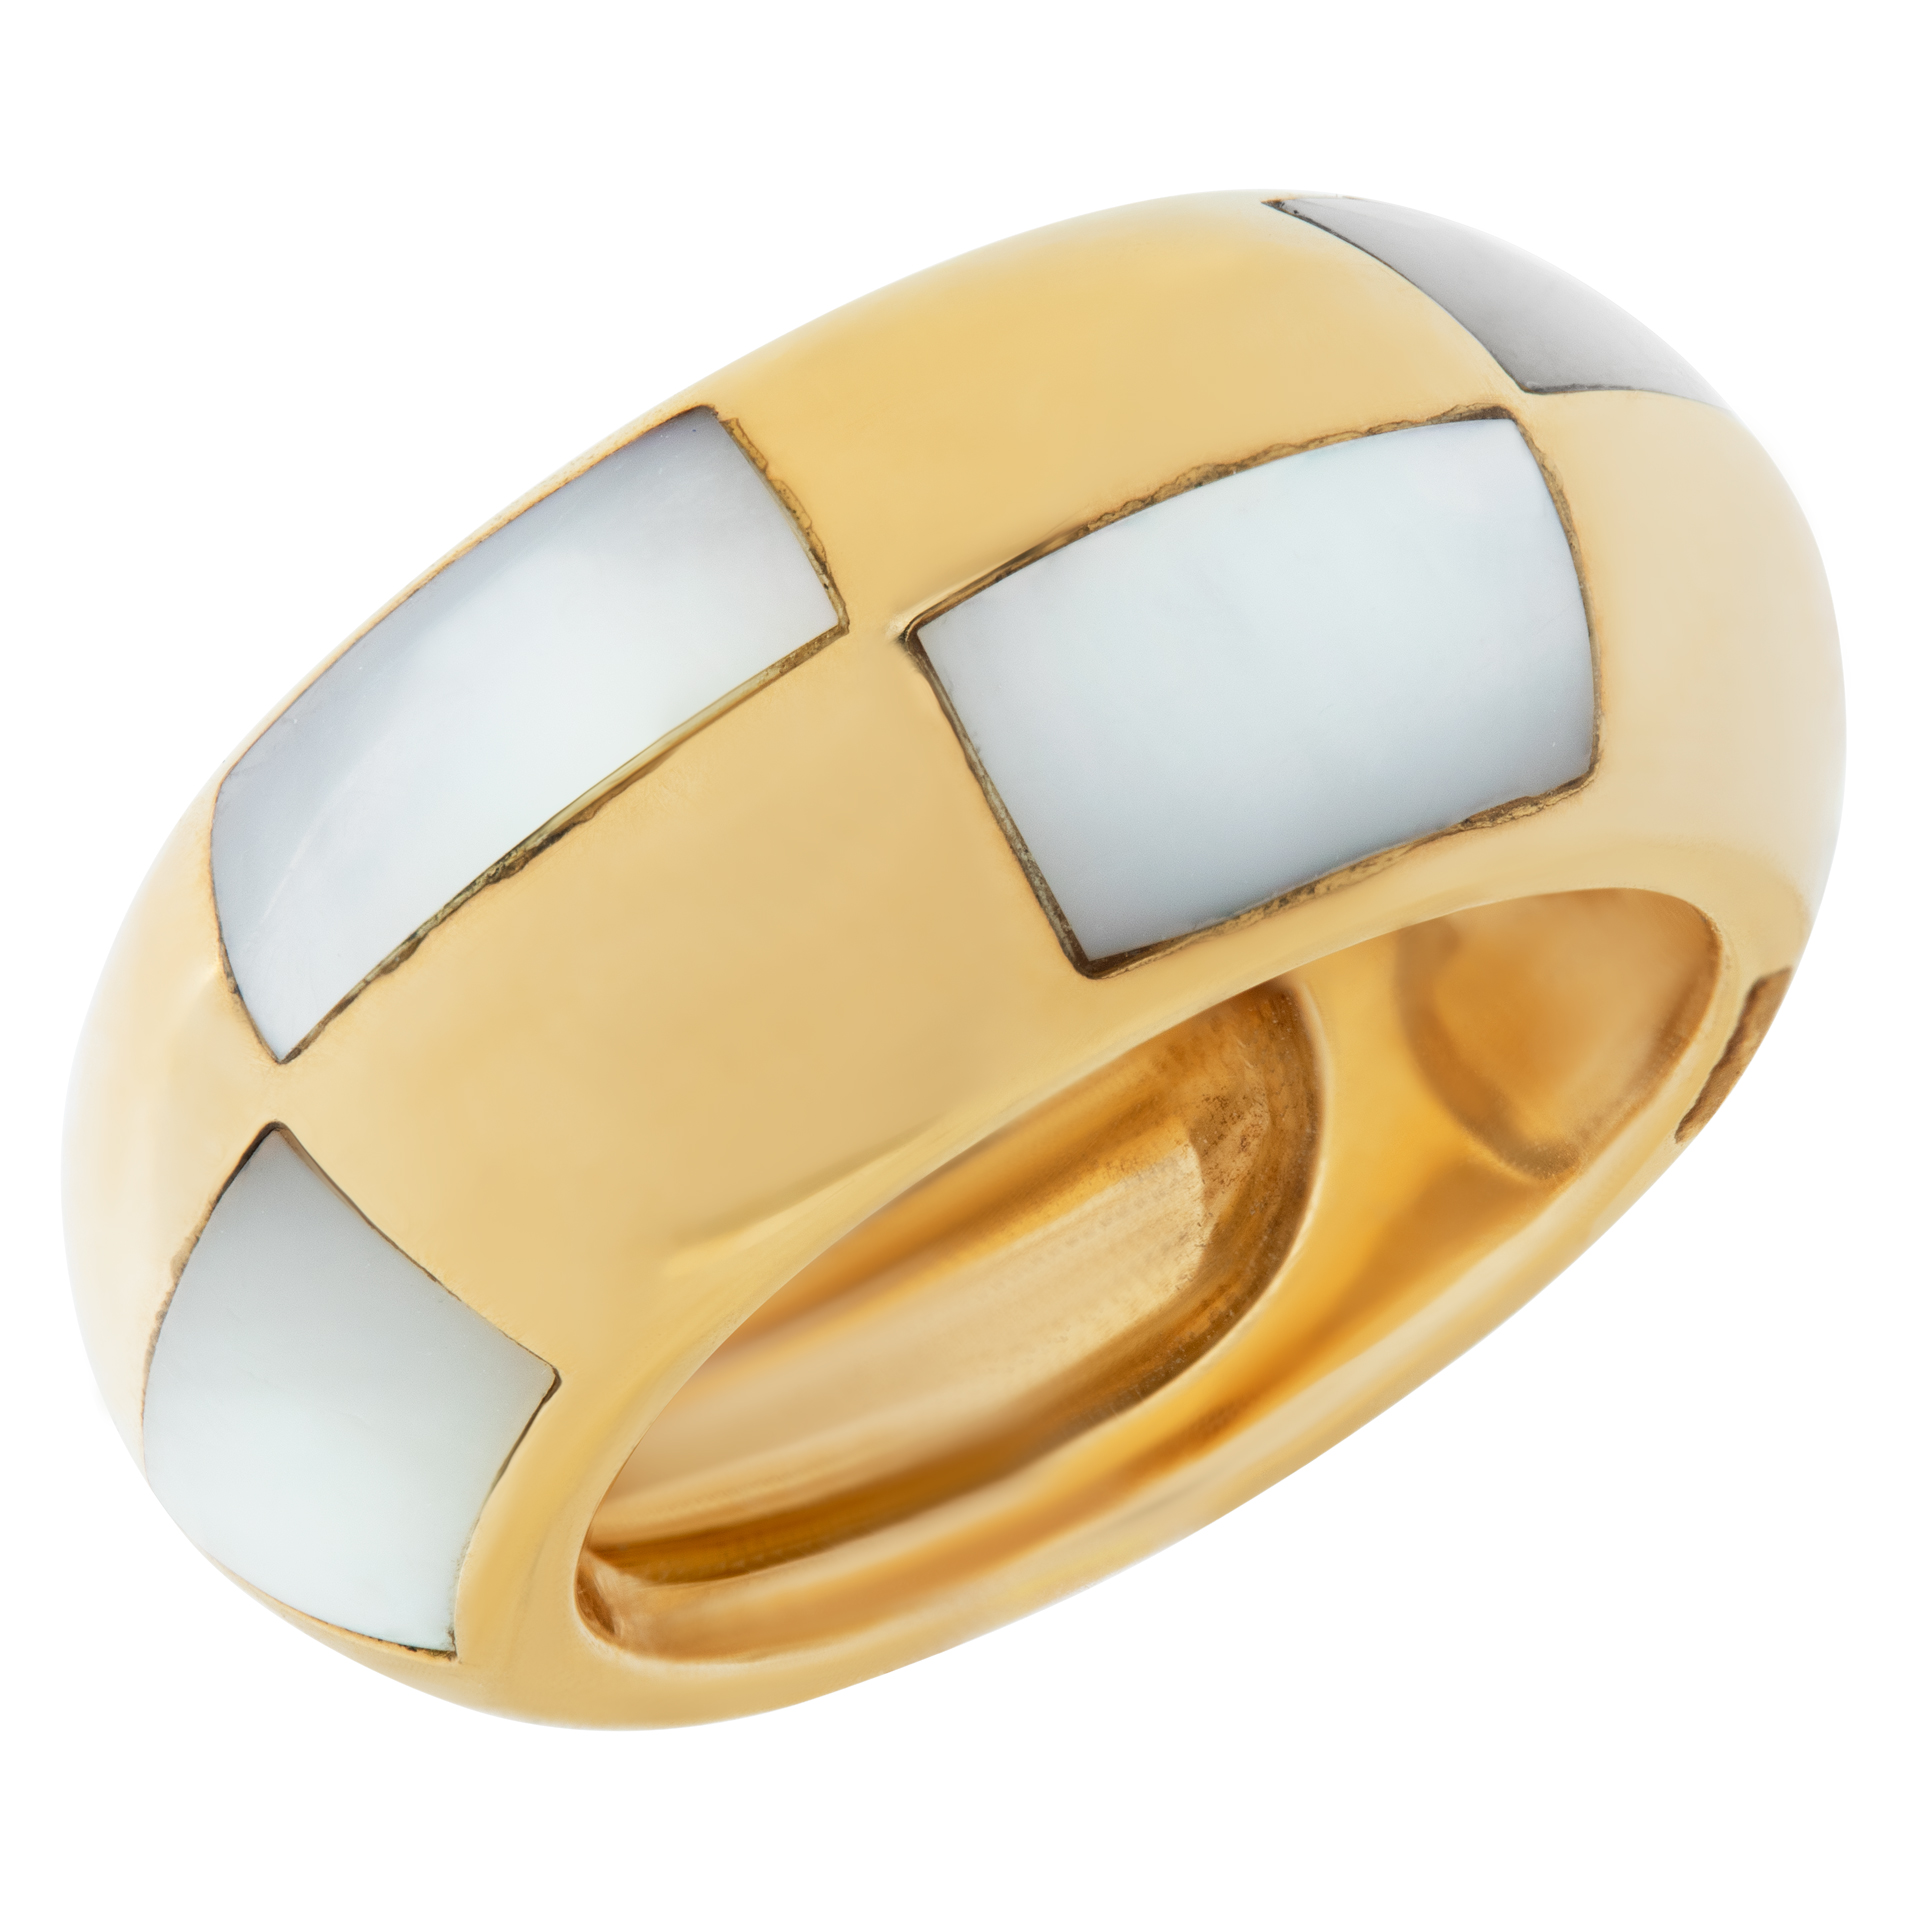 Mauboussin ring in 18k yellow gold with inlaid mother of pearl accents image 3